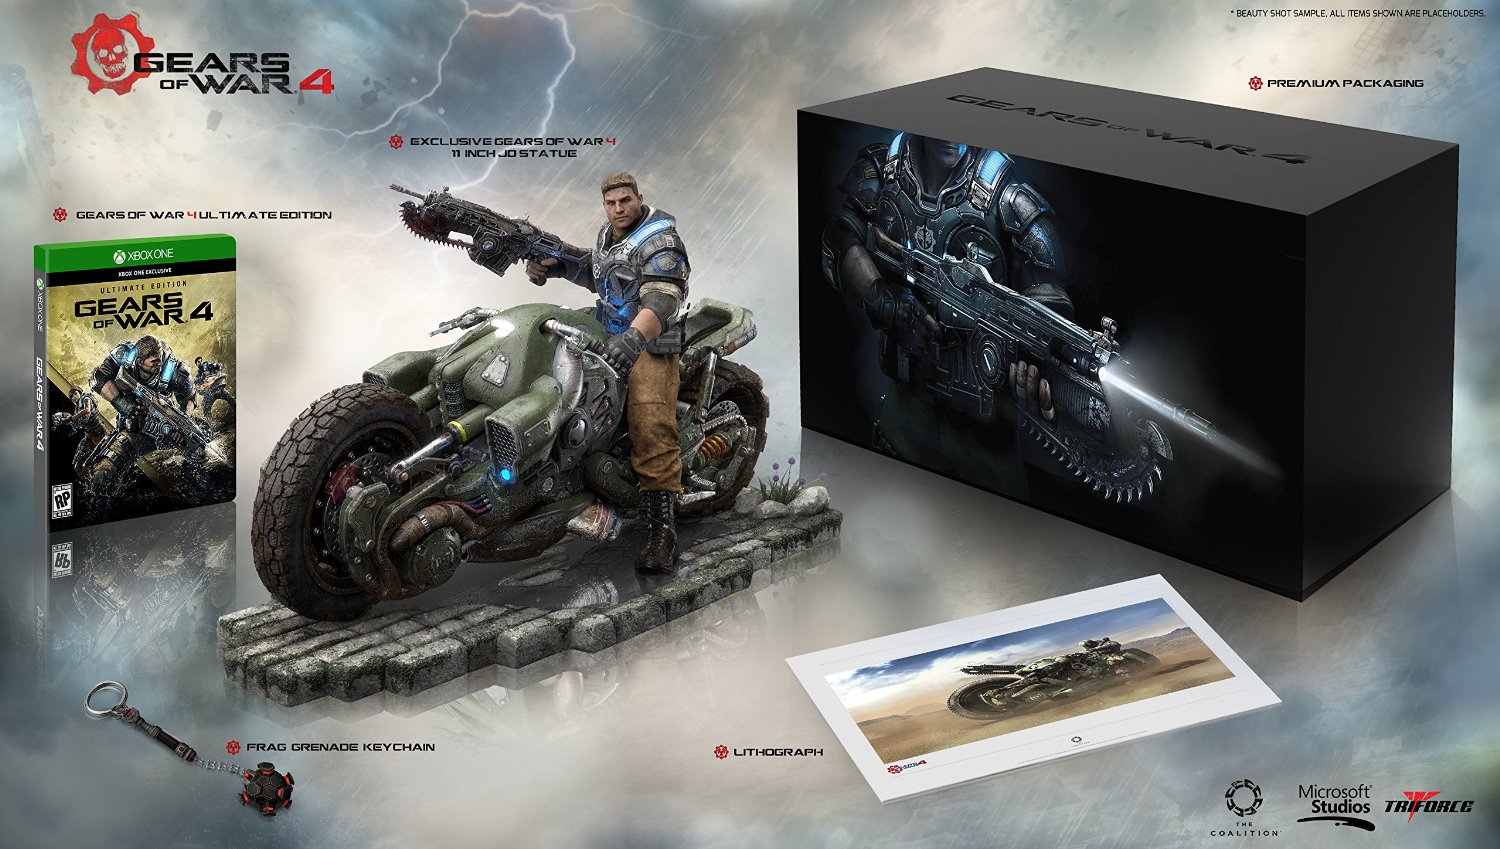 free download xbox one s gears of war 4 edition